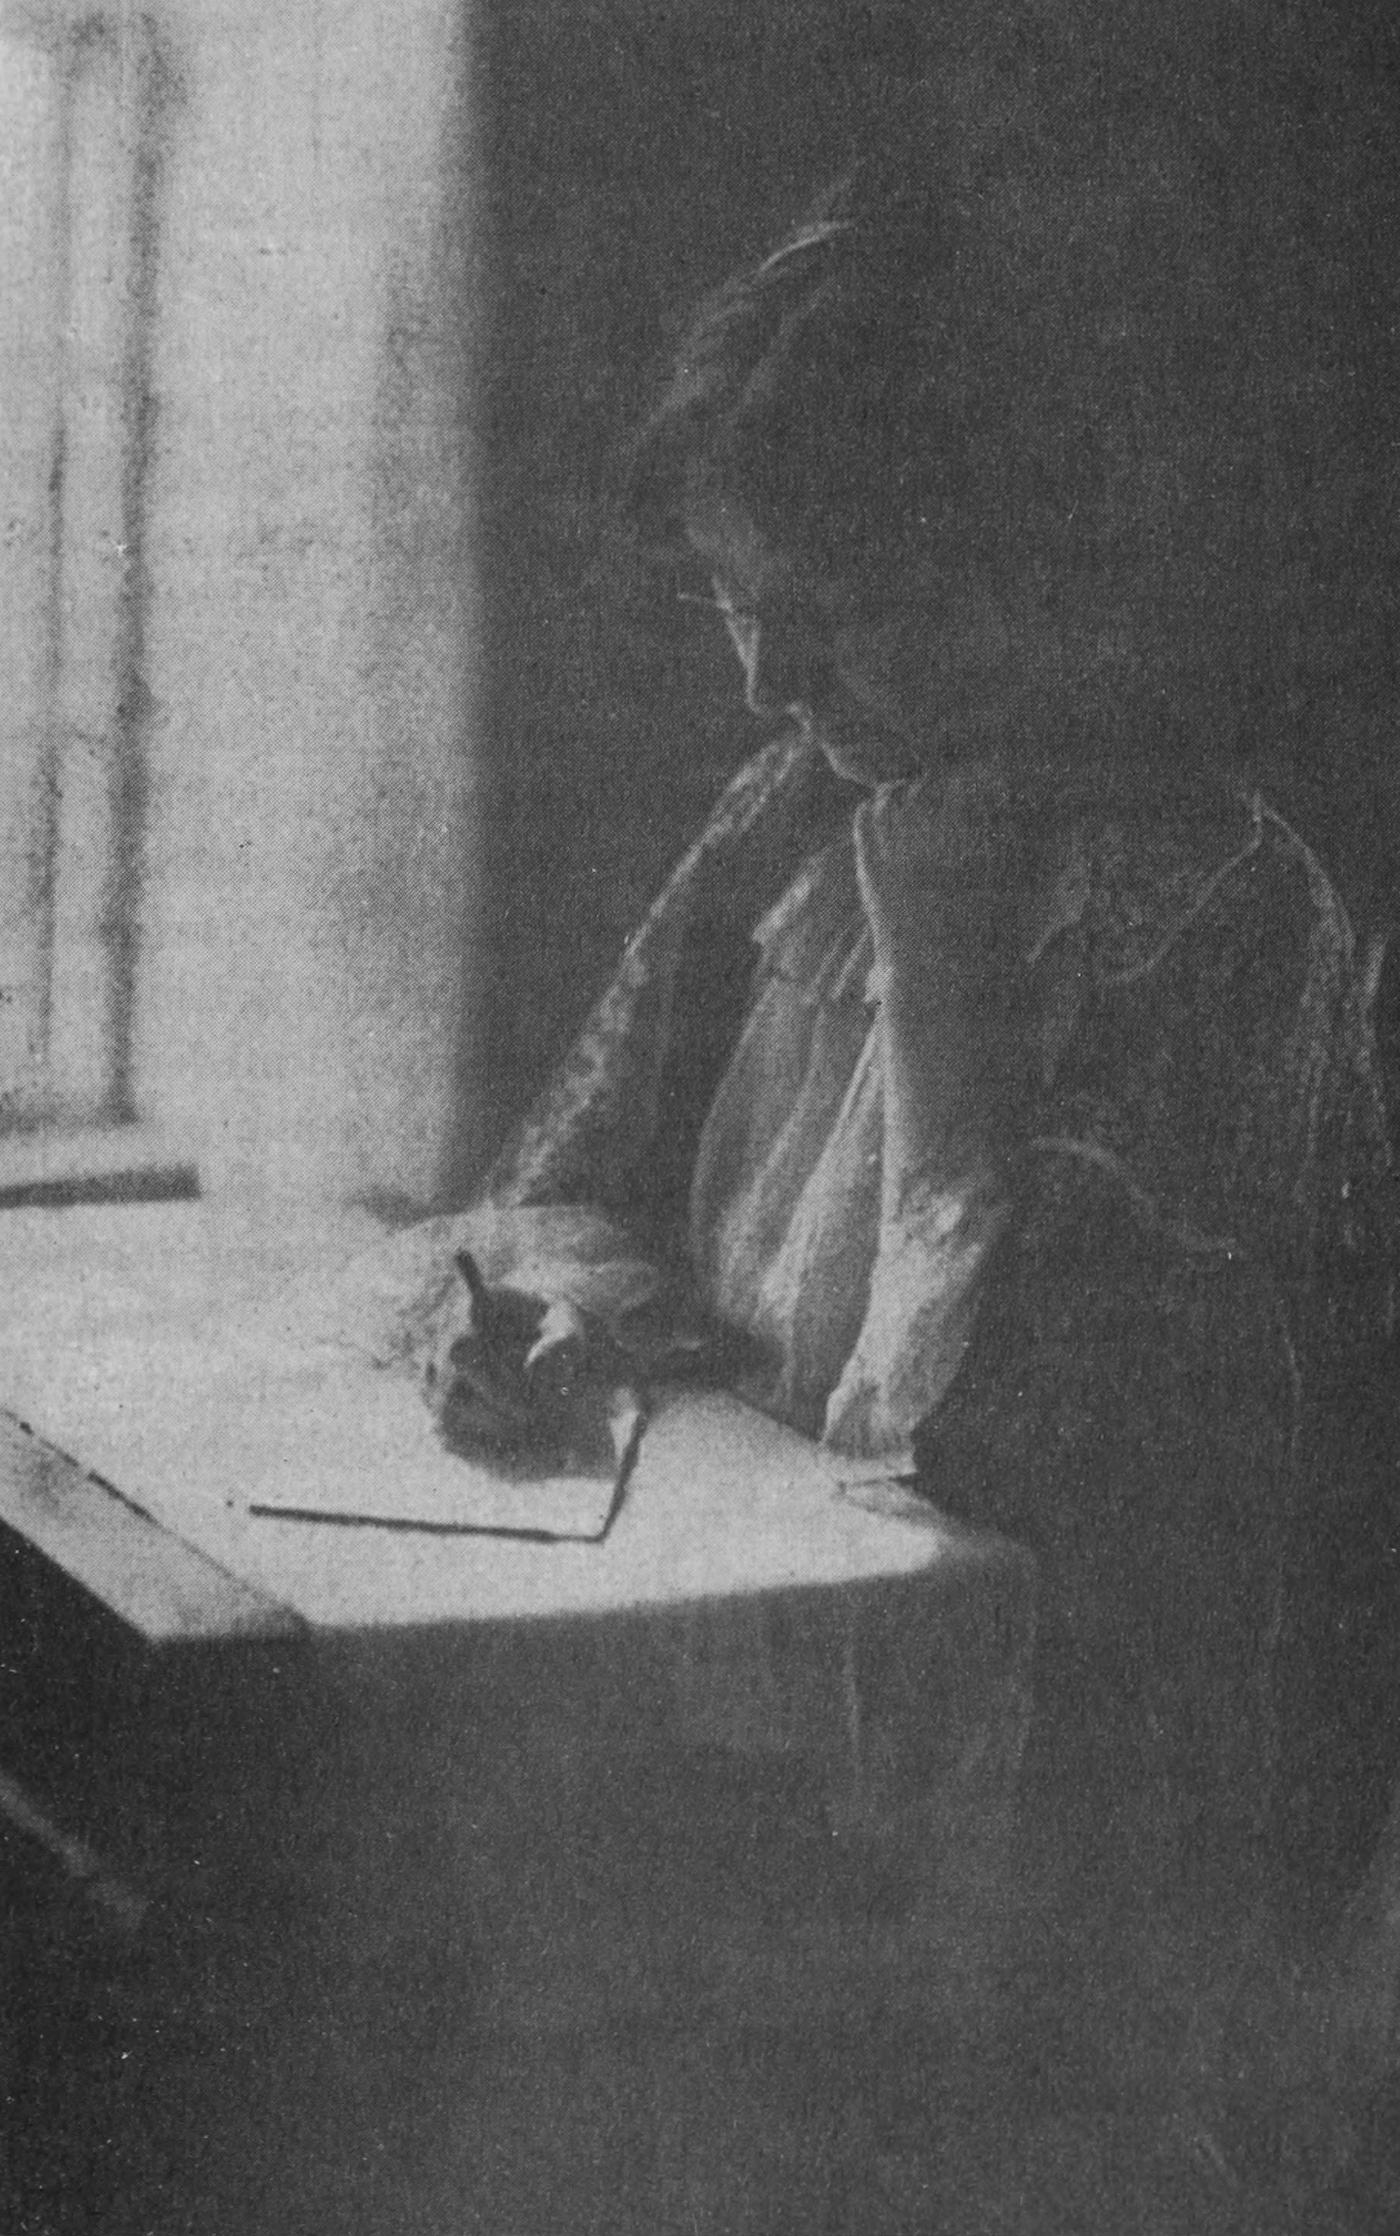 A photograph of Ellen Gates Starr seated at a desk, writing a letter.